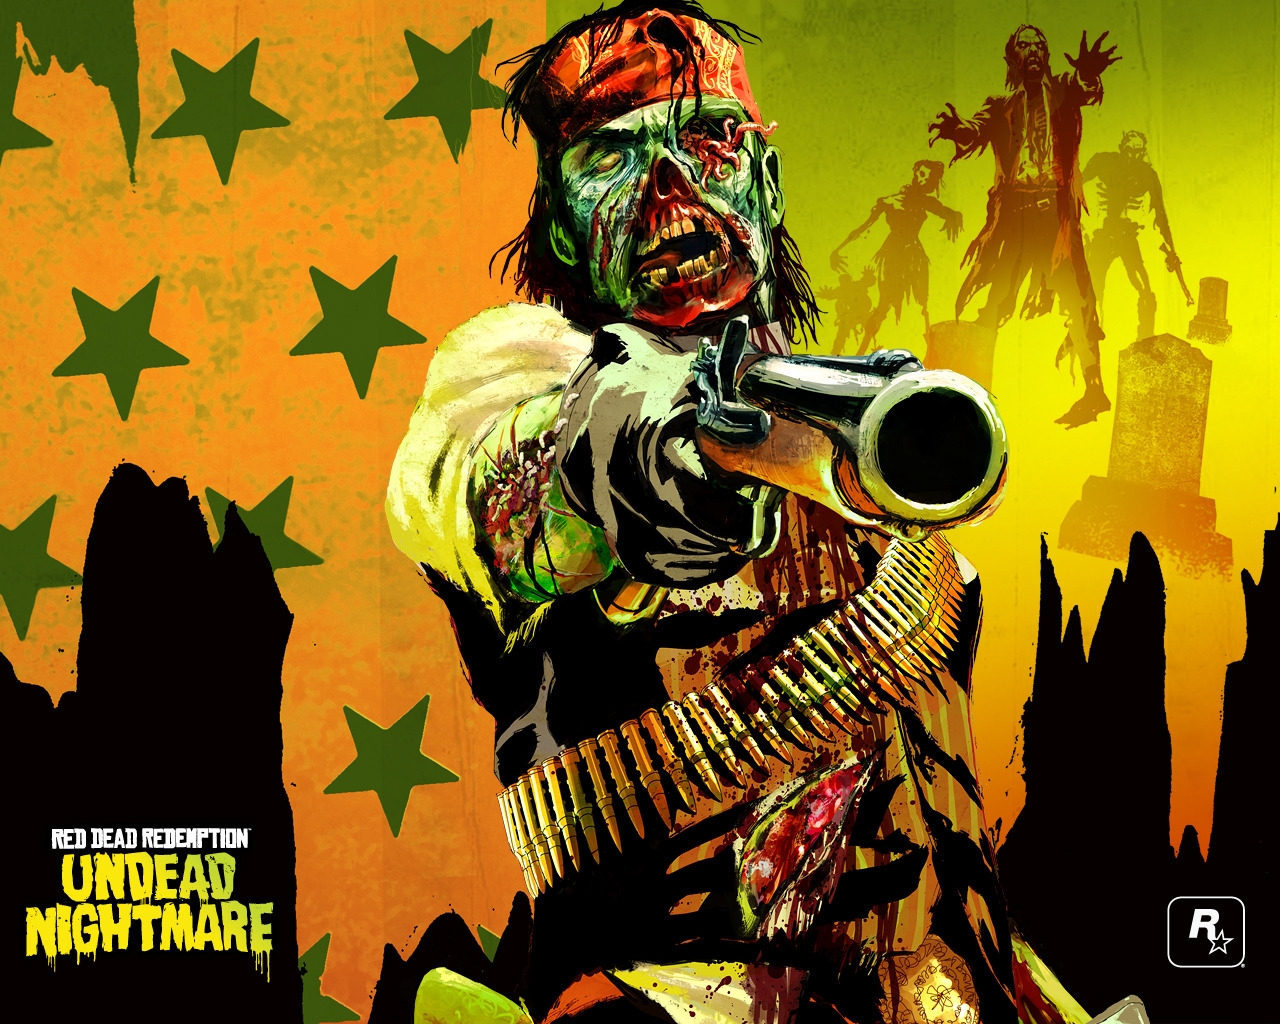 Red Dead Redemption for 1280 x 1024 resolution